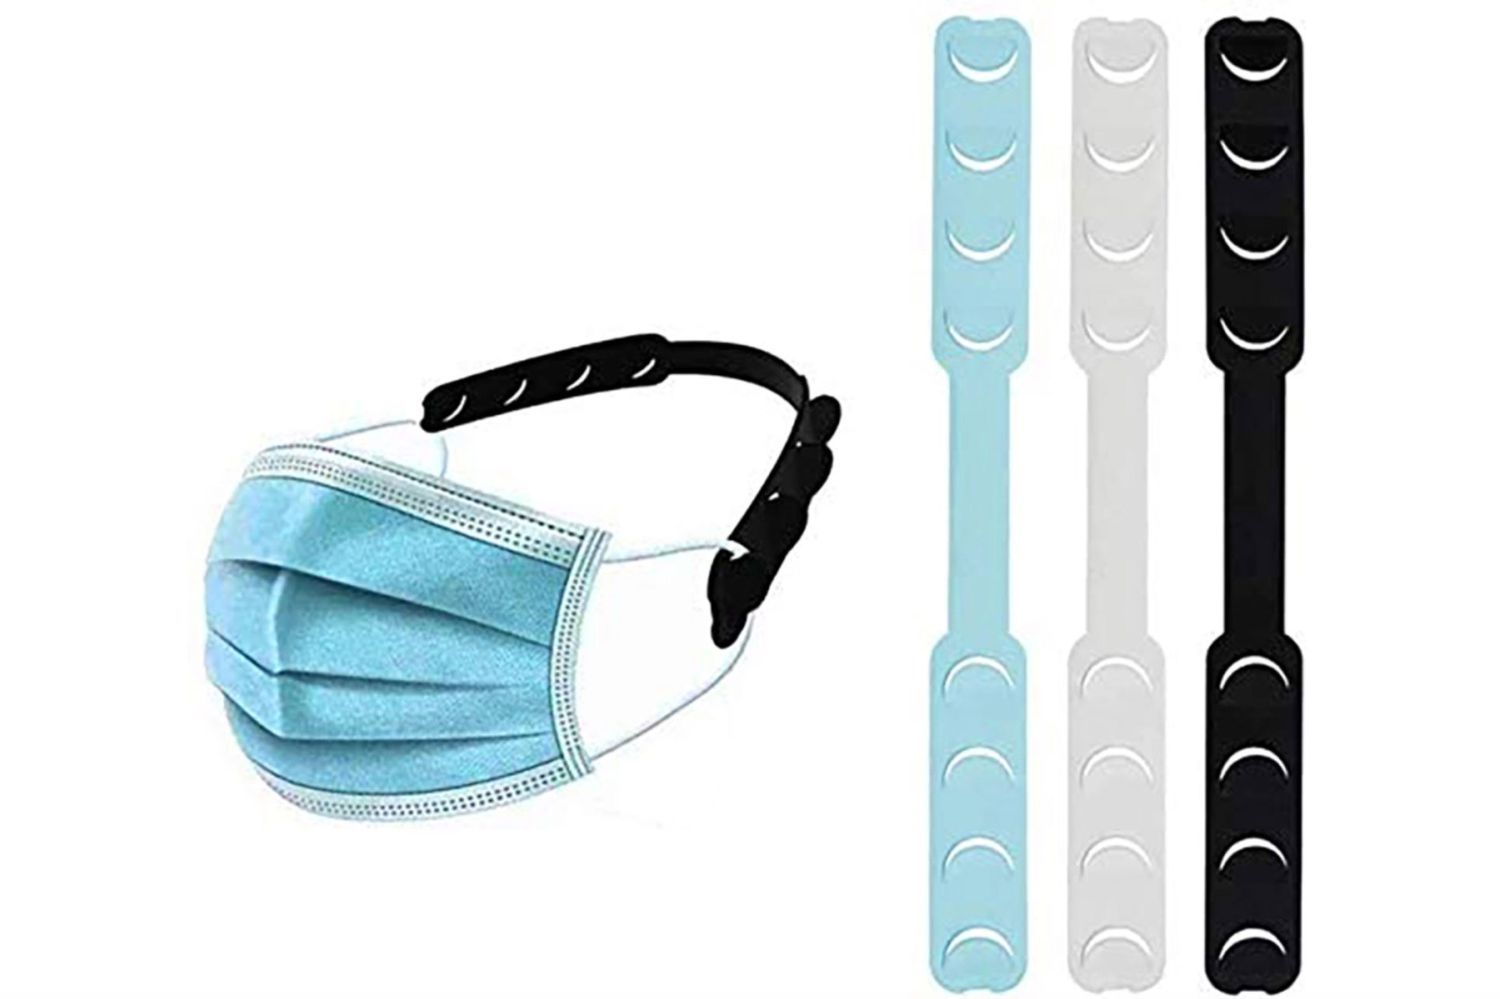 Mask Belt of Masks Silicone Snugly Extending for Mask Band LETTON Silicone Mask Strap Extenders 10 or 5 Pcs Mask Holder Hook Ear Protectors for Mask Wearing Mask Extension Buckle Ear Pain Relieved